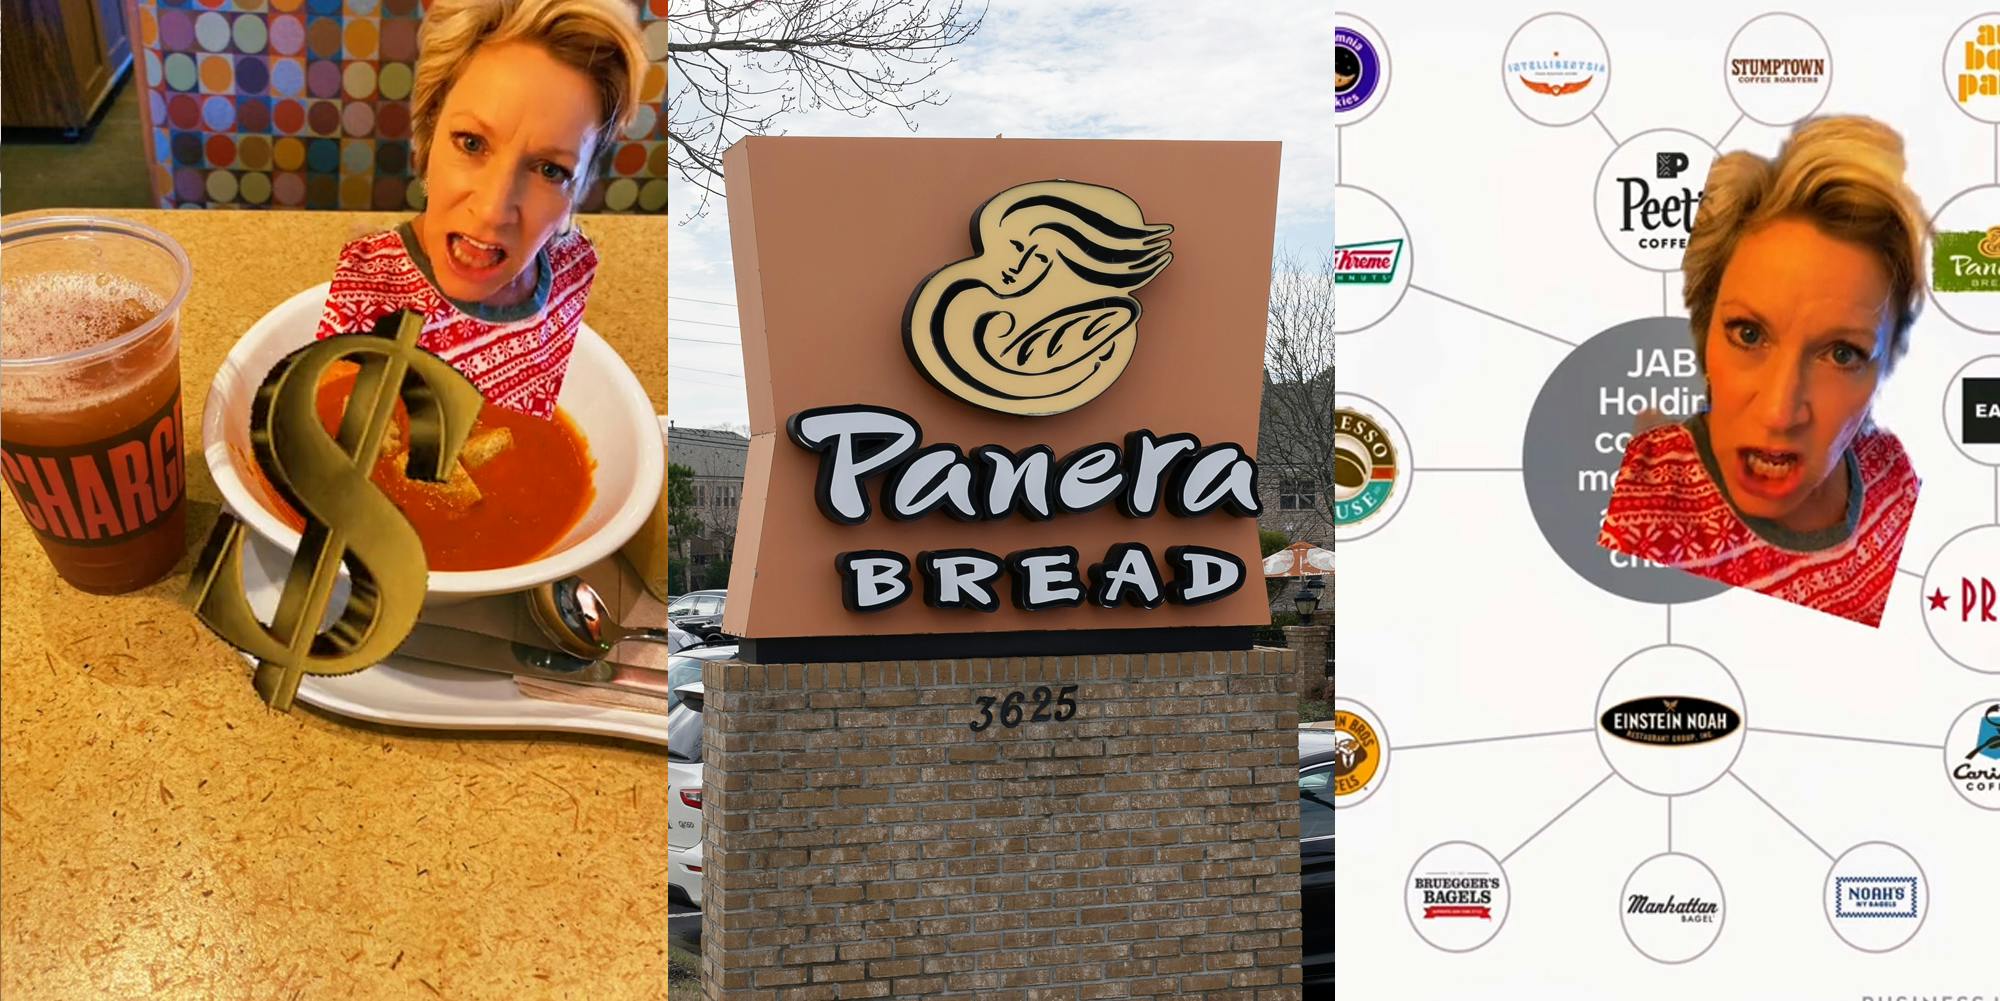 Customer Rants About $12 Soup And Tea From Panera Bread